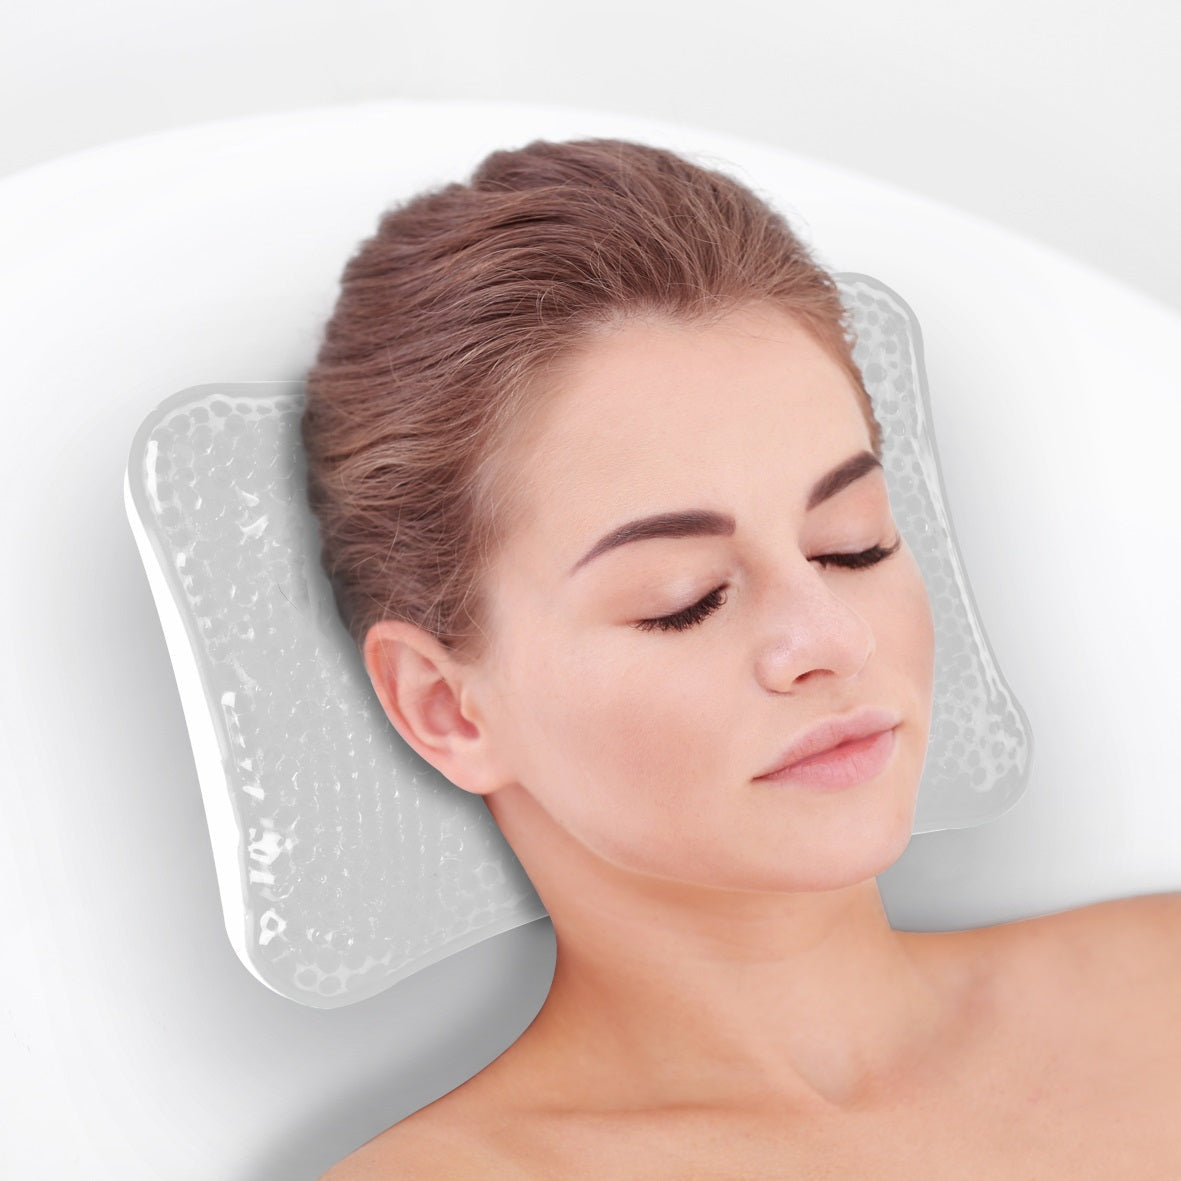 Clear Soothing Gel Bath Pillow Rest your head in comfort relaxing in the bath soft and comfortable reducing muscle stiffness cooling gel beads washing wash suction sooth showers showering shower rests resting rest relaxing relax house Home head Gel cooling Cool beads baths bathrooms bathroom bathing bath